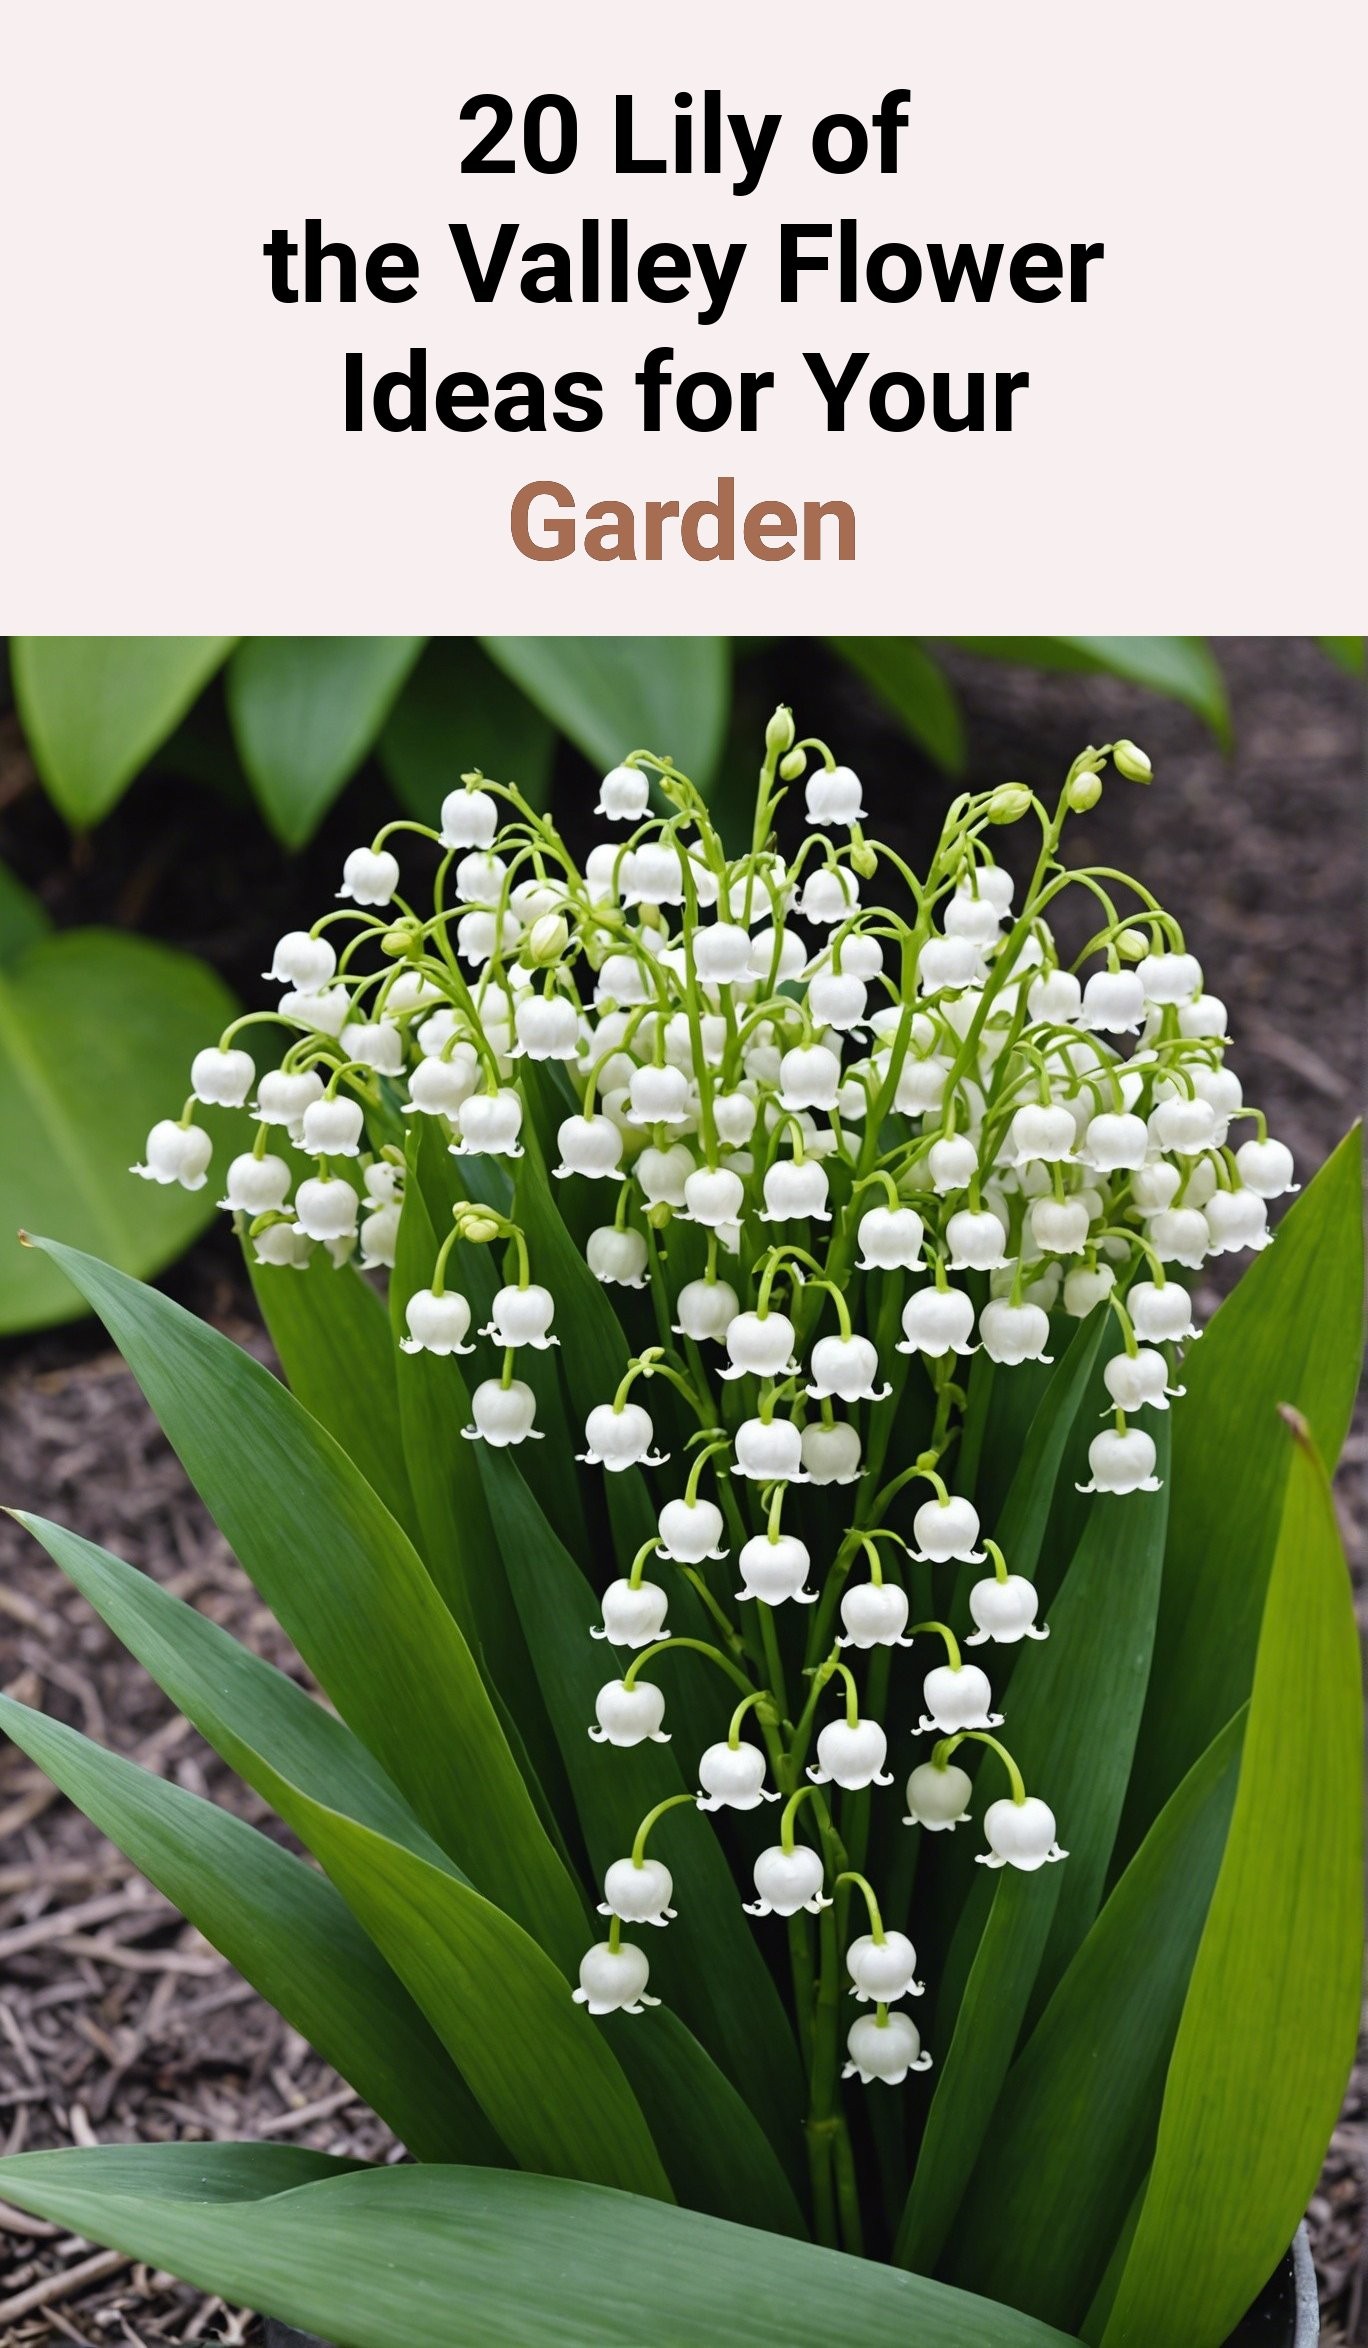 20 Lily of the Valley Flower Ideas for Your Garden